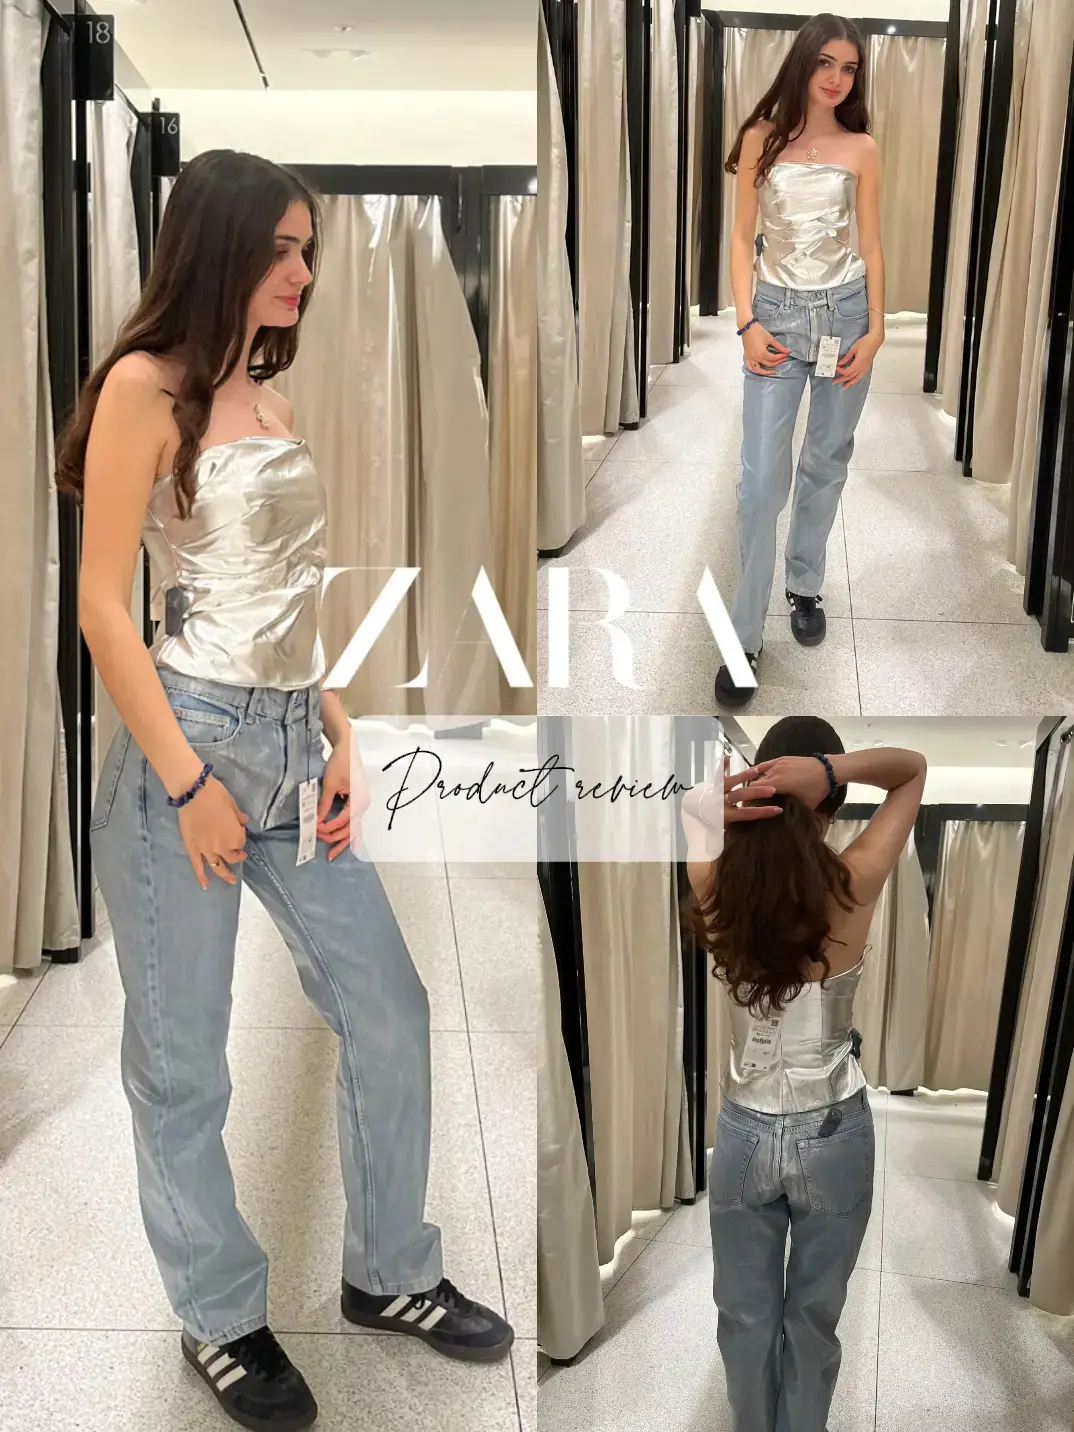 ZARA outfit review ✨, Gallery posted by Alexa Clover